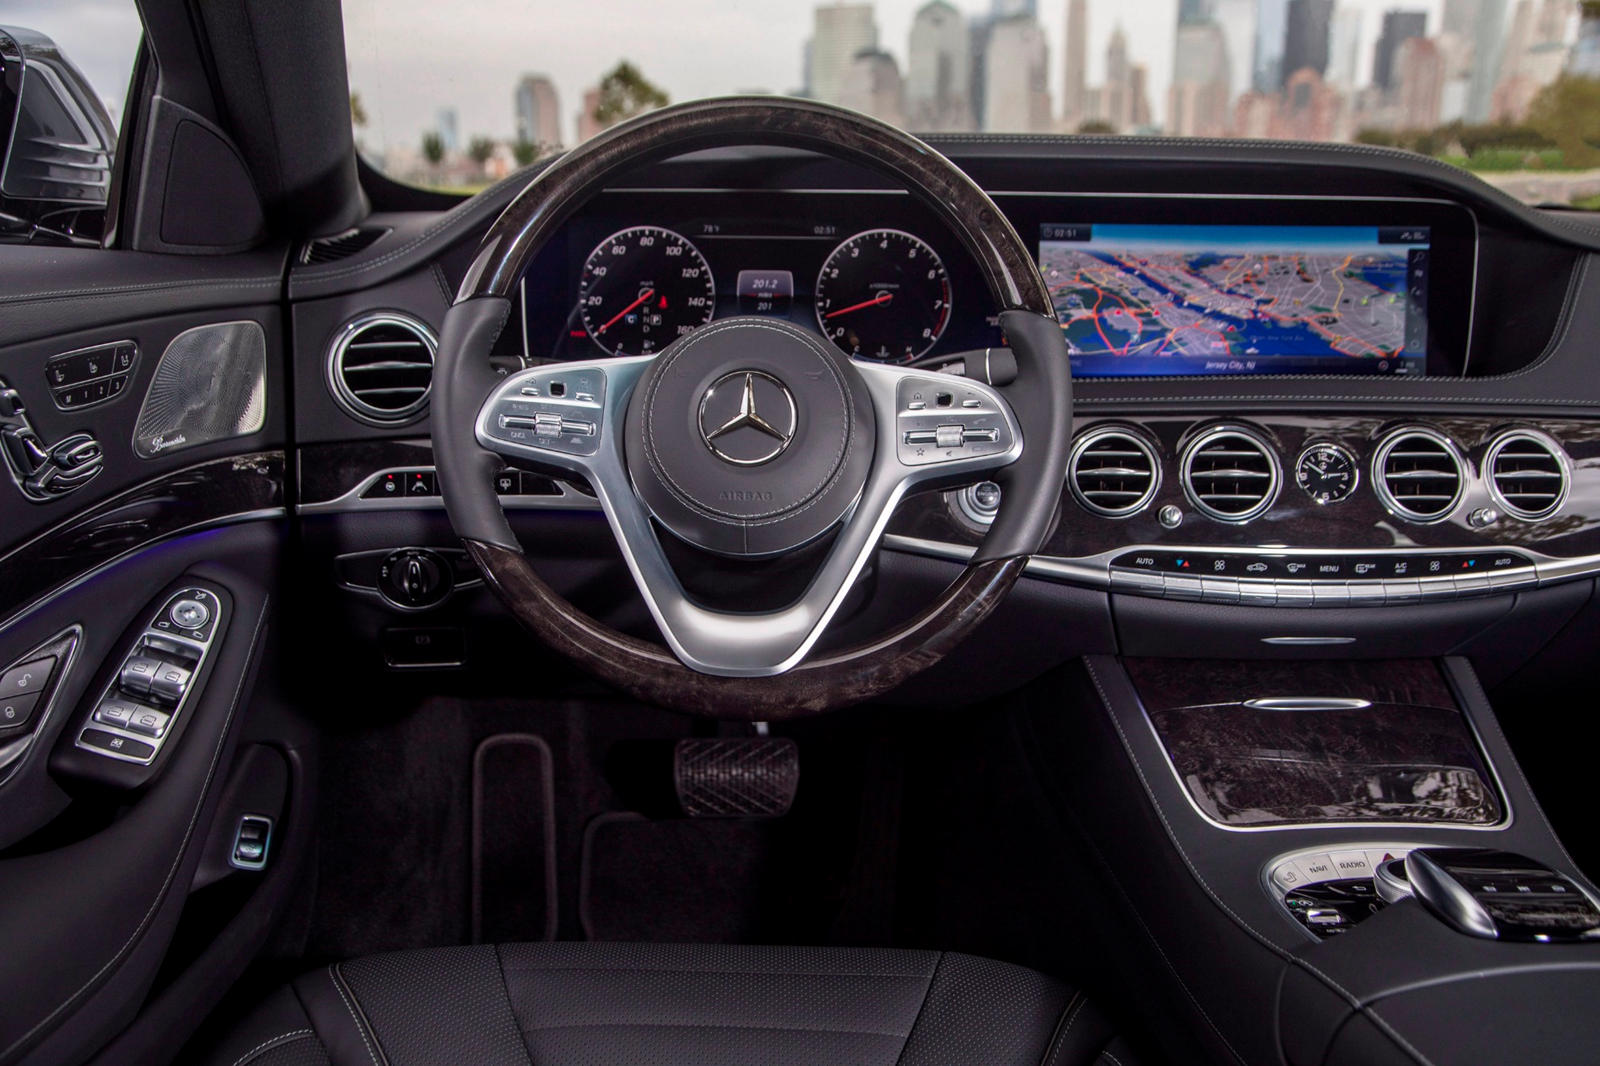 2018 Mercedes-Benz S-Class first drive review: relaxation chamber